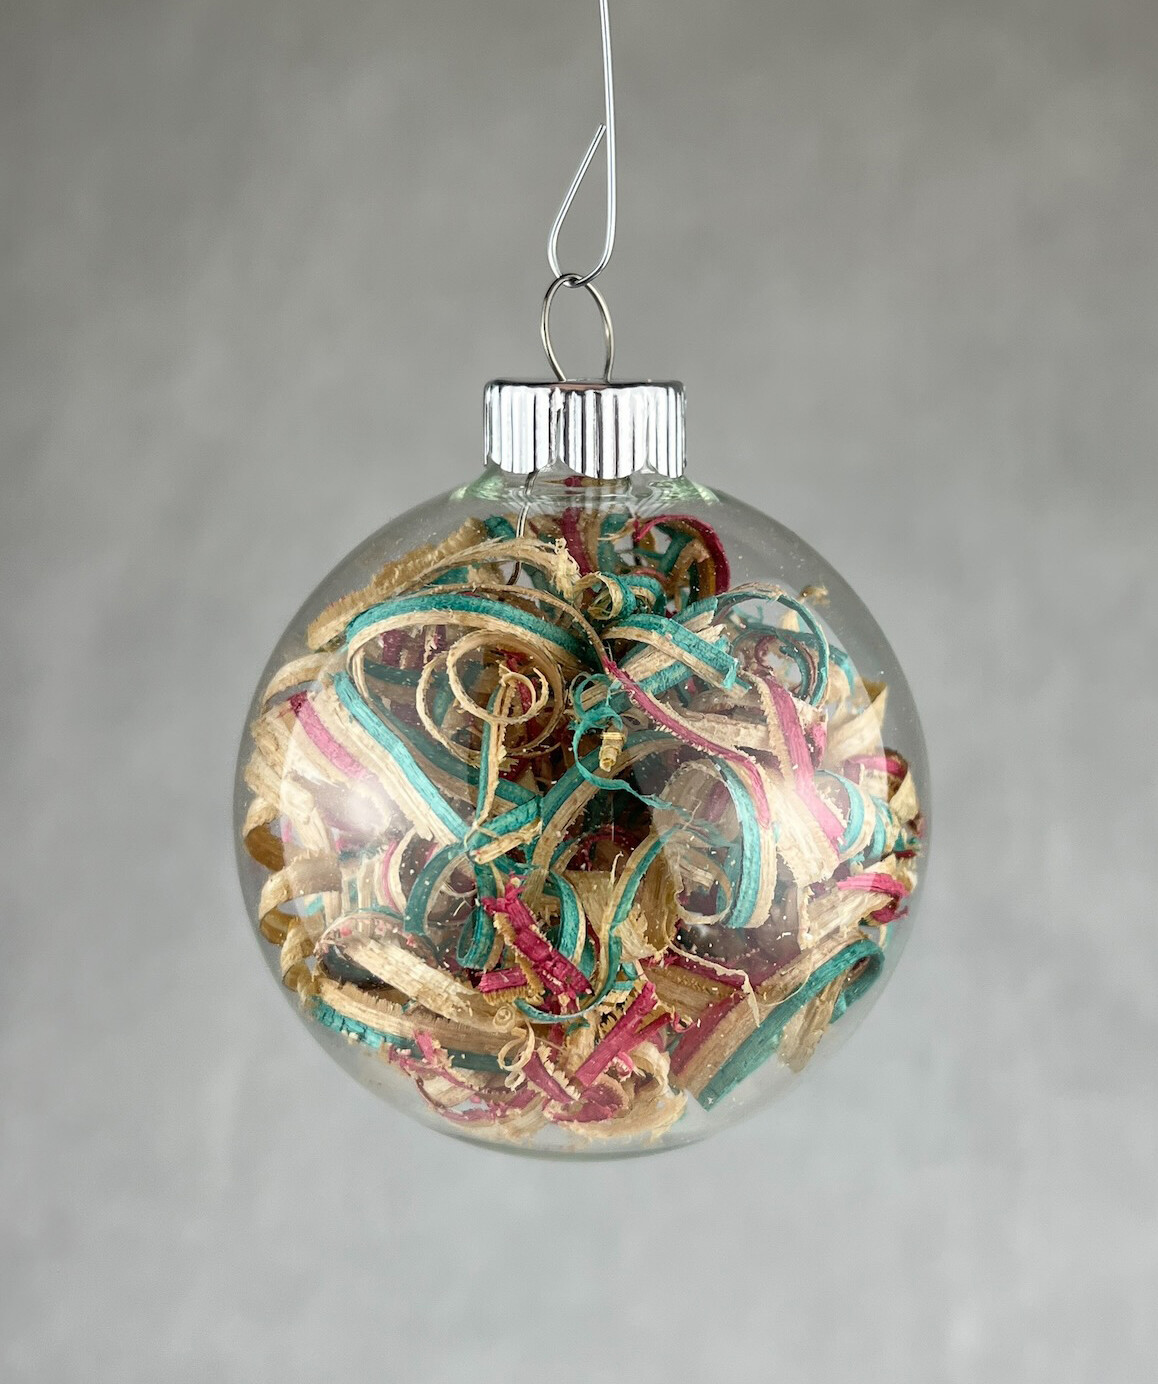 Small Glass Ornament with Various Wood & Skateboard Shavings